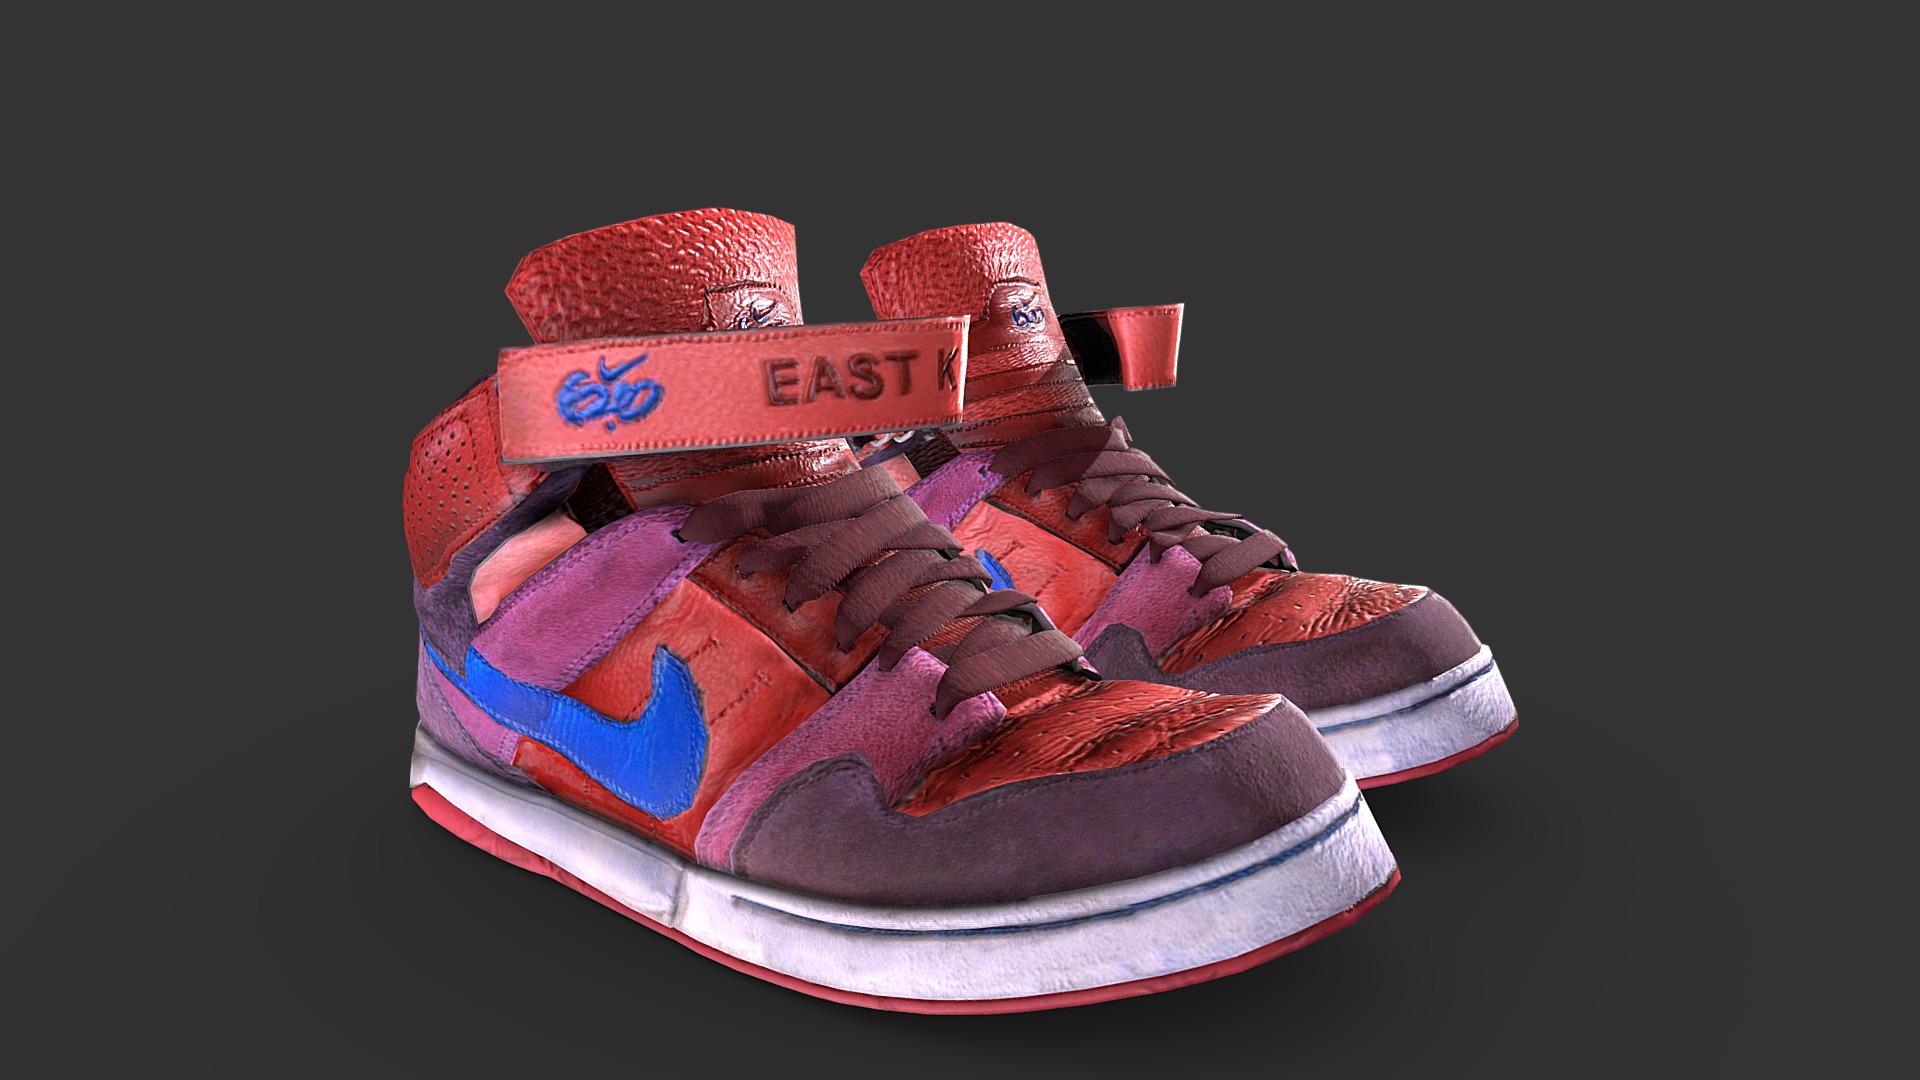 3D model Nike East K 75 Low Poly - This is a 3D model of the Nike East K 75 Low Poly. The 3D model is about a cake with a red and blue frosting and a red and white hat.